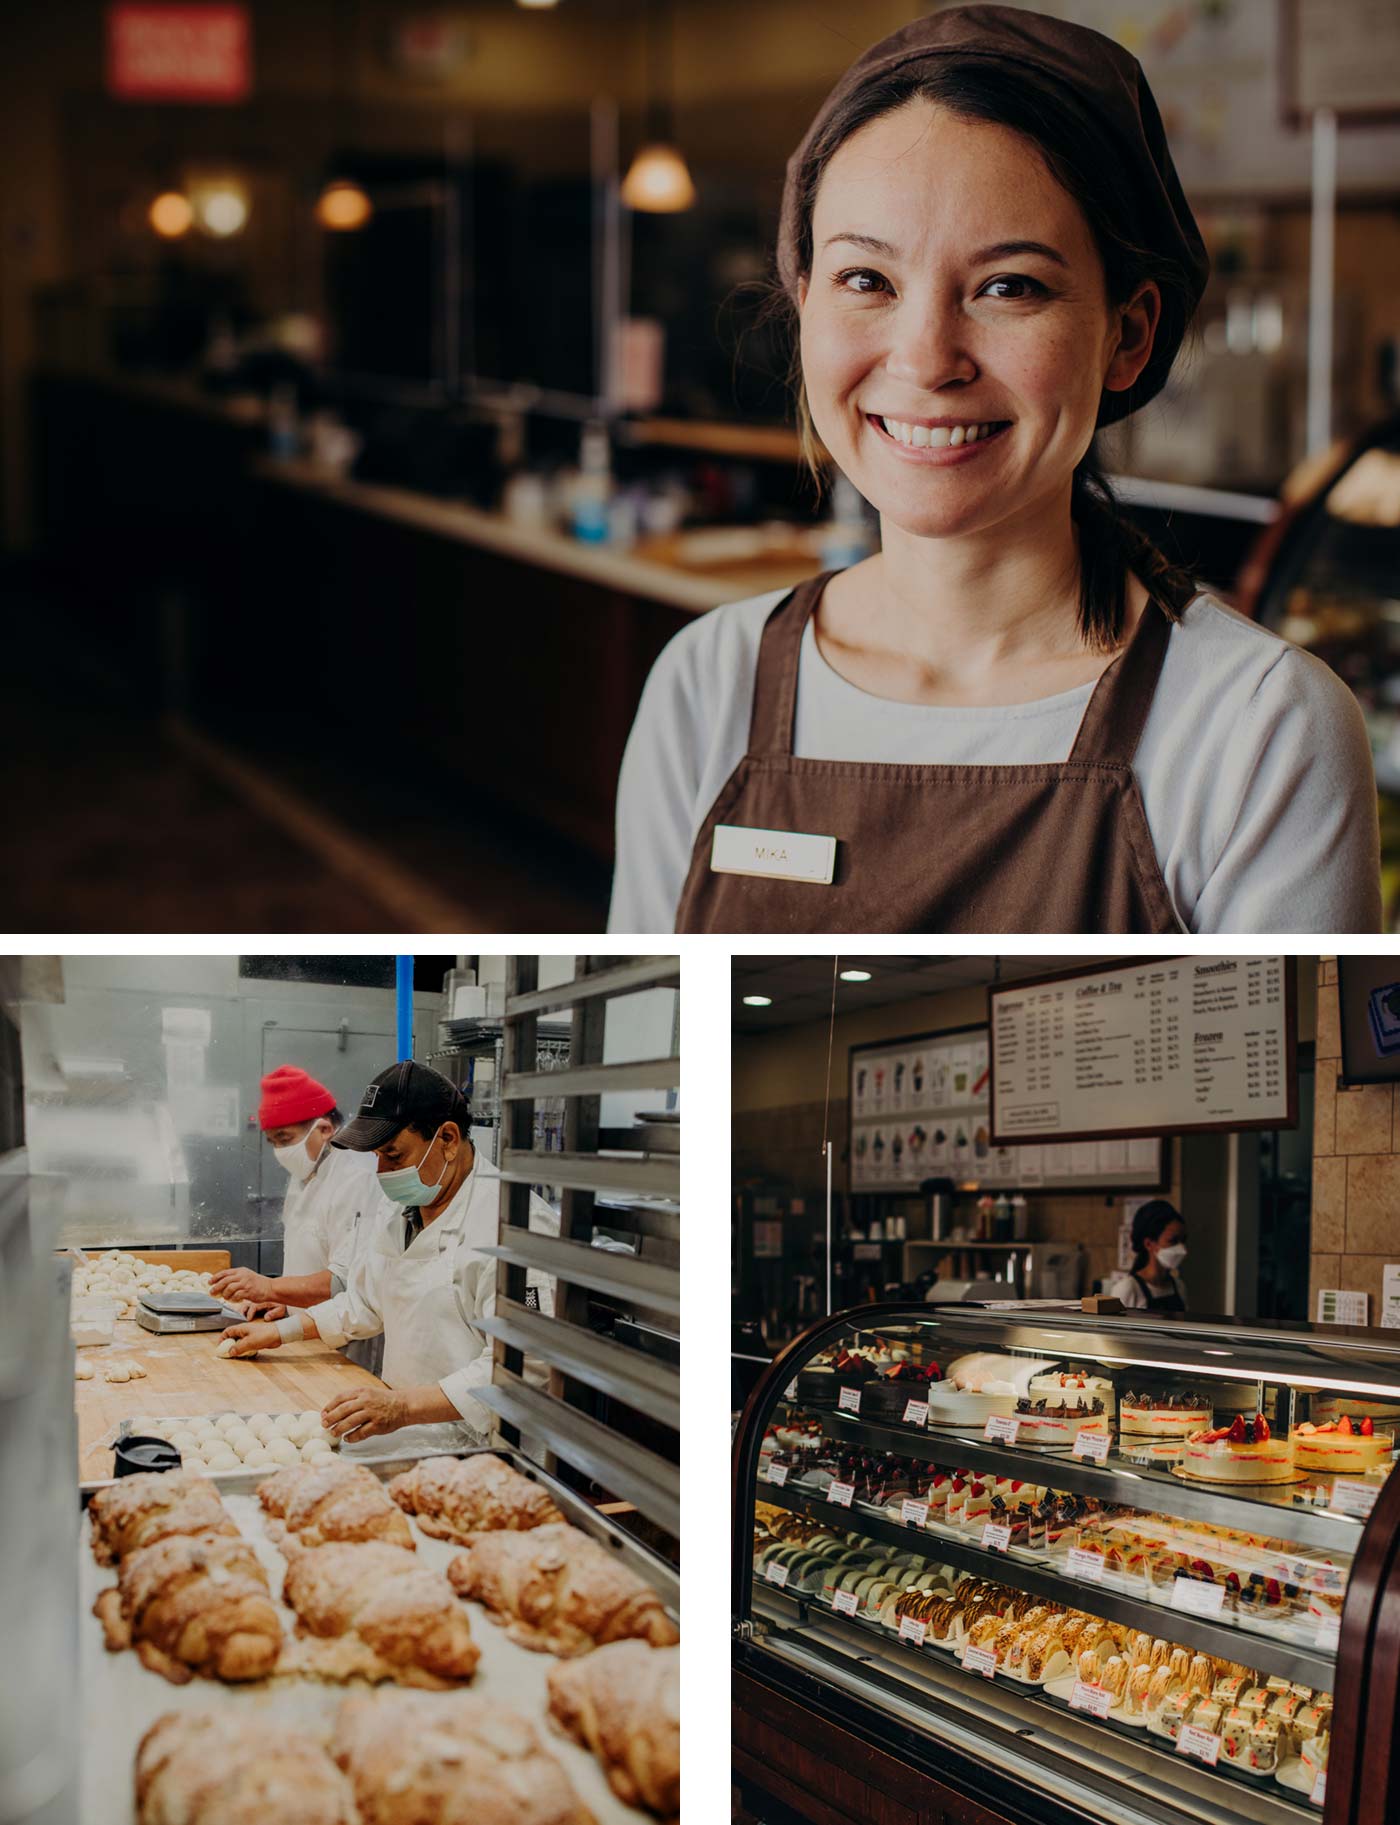 Top: Mika Lecklider. Bottom Left: The shop has 20 bakers working to keep customers supplied. Bottom Right: Cakes and pastries fill the cold case.